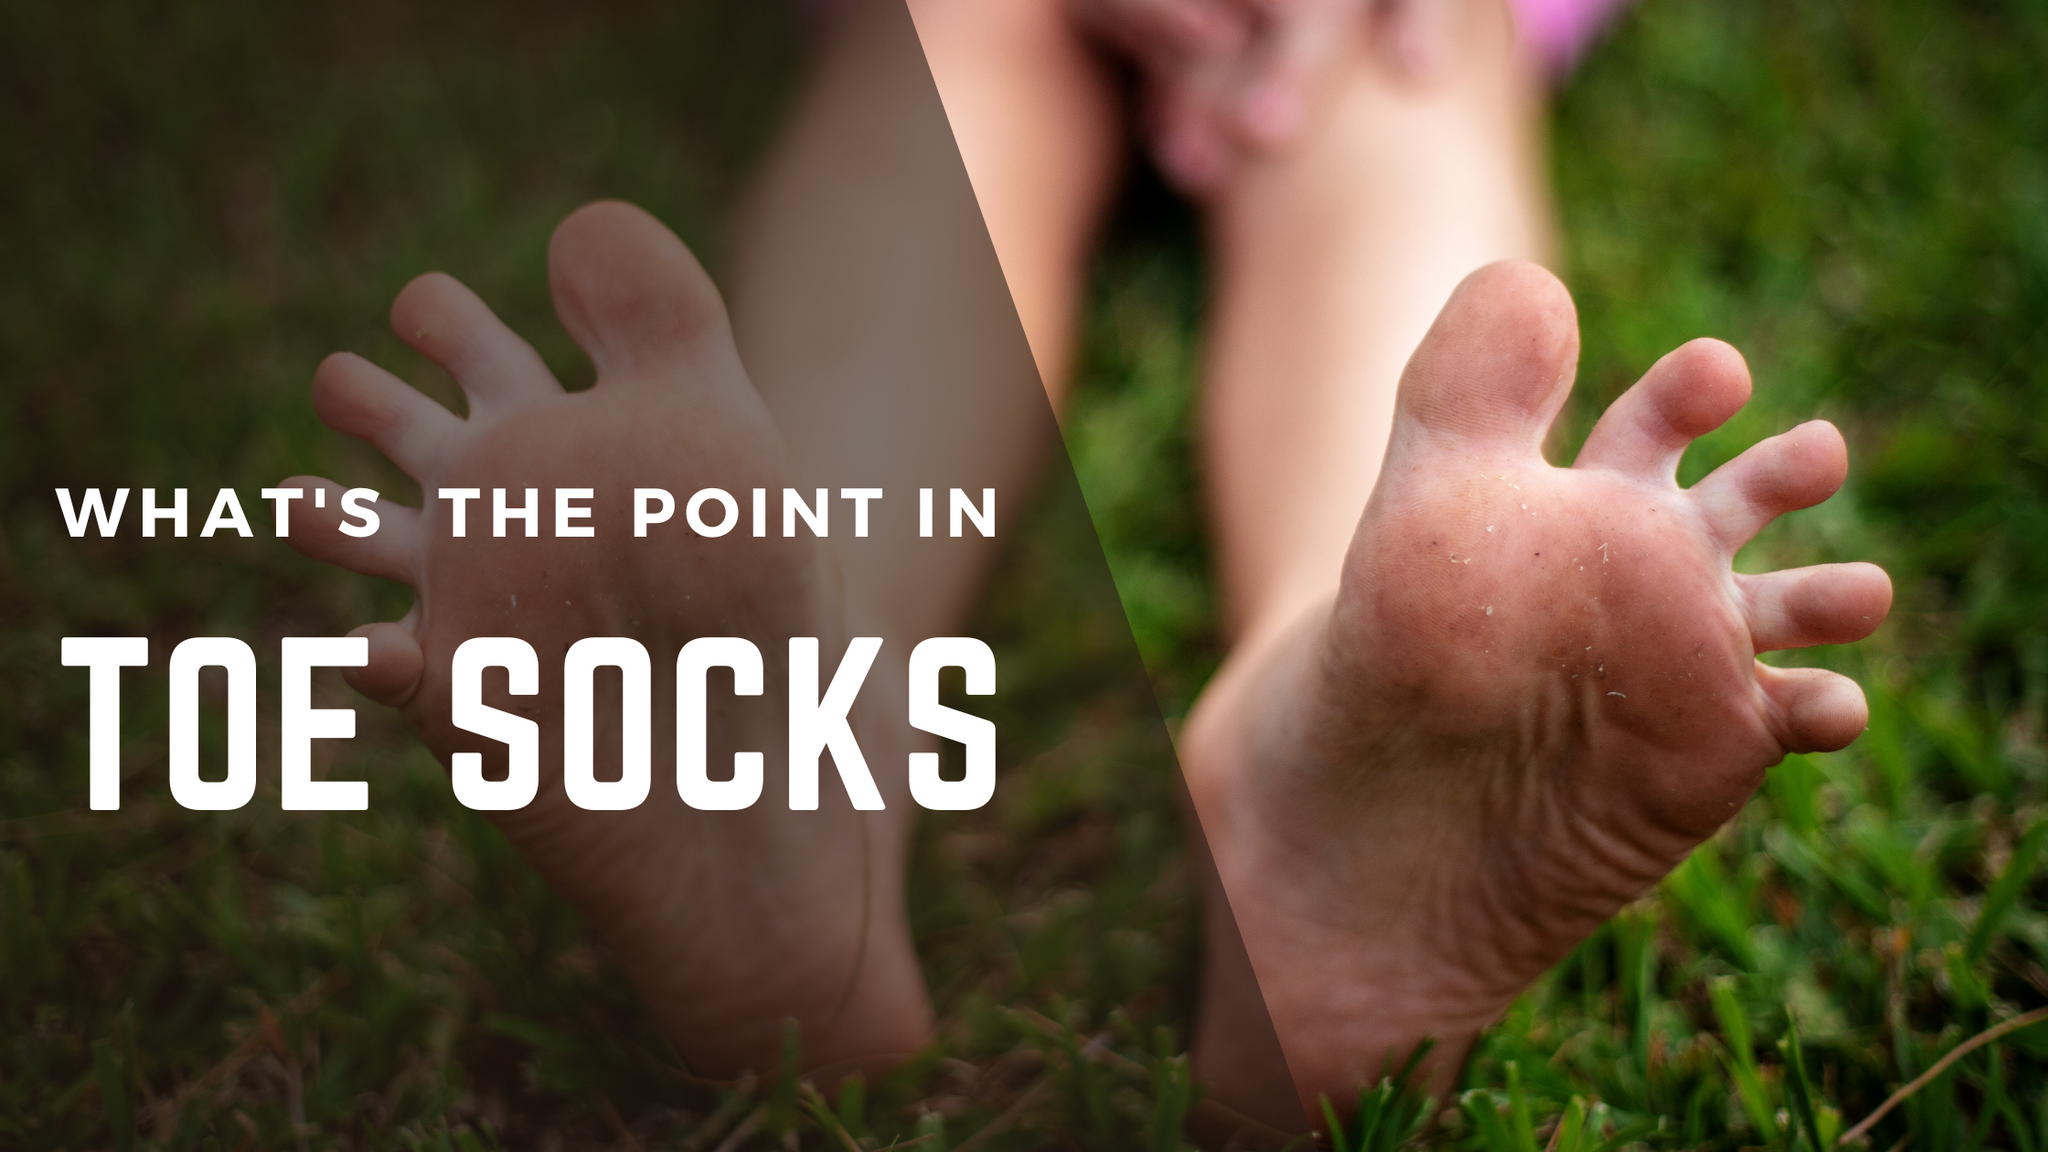 What's the point of toe socks?